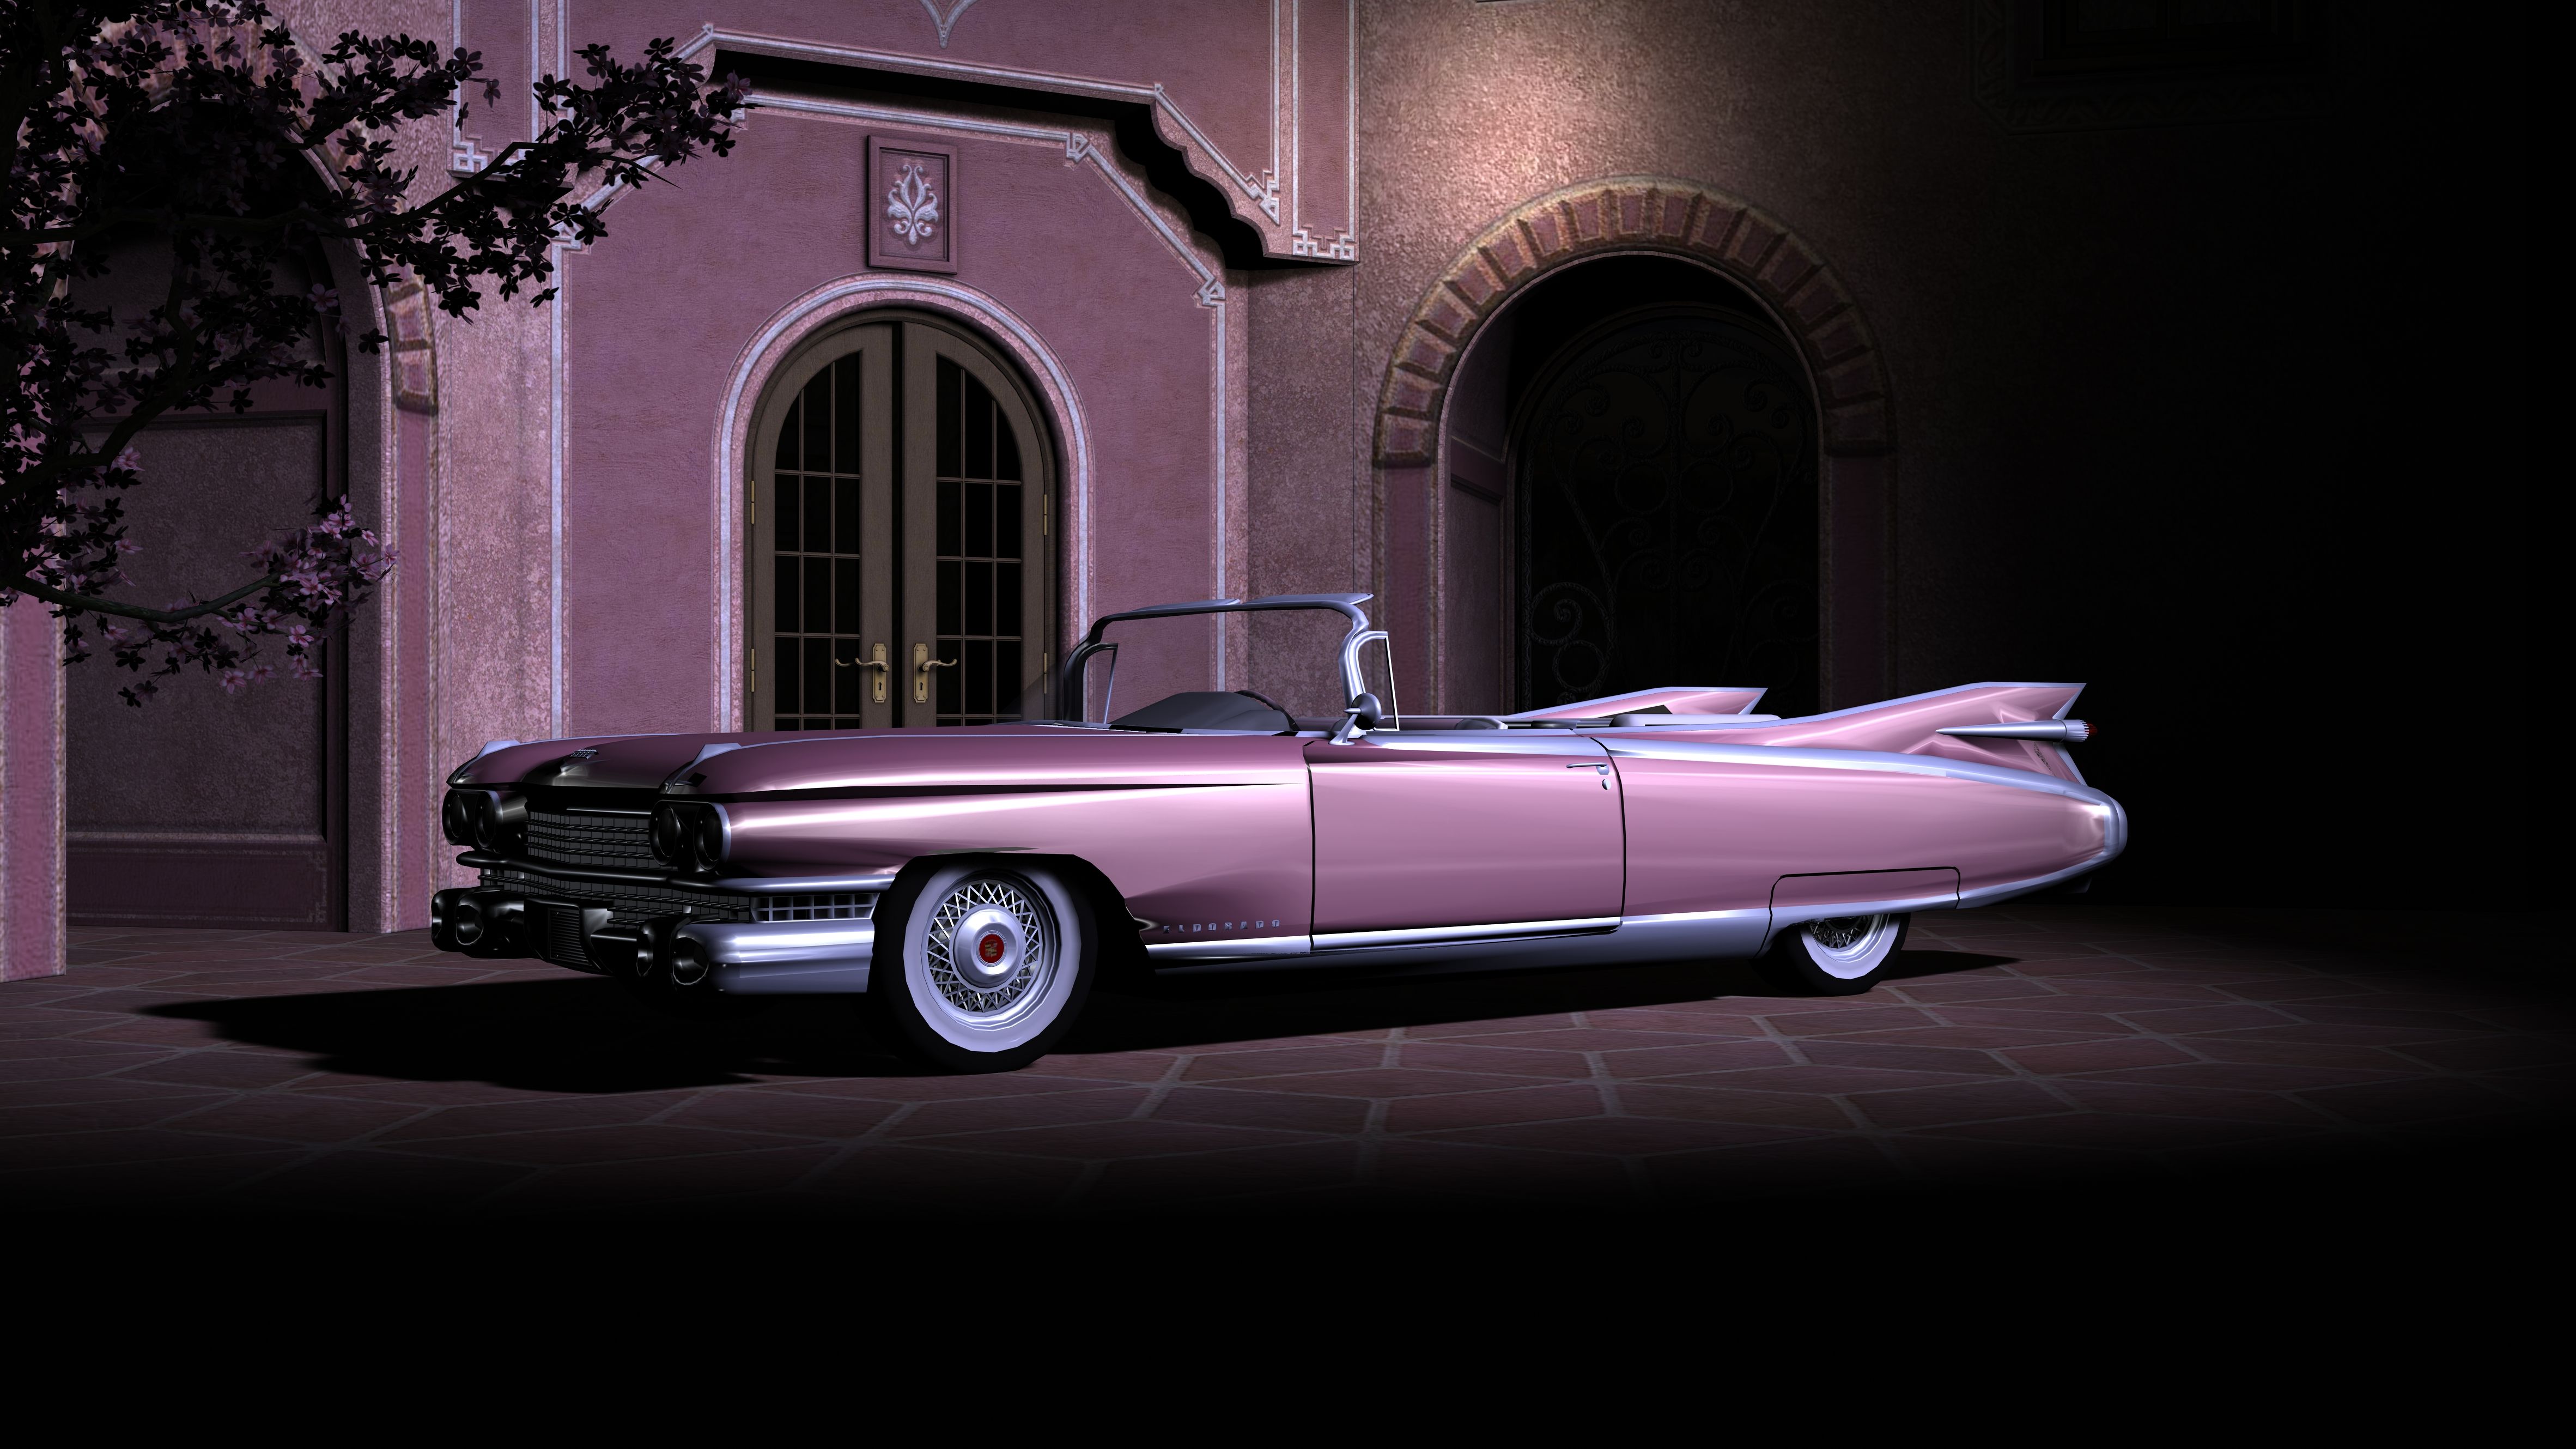 Old Cadillac Wallpapers